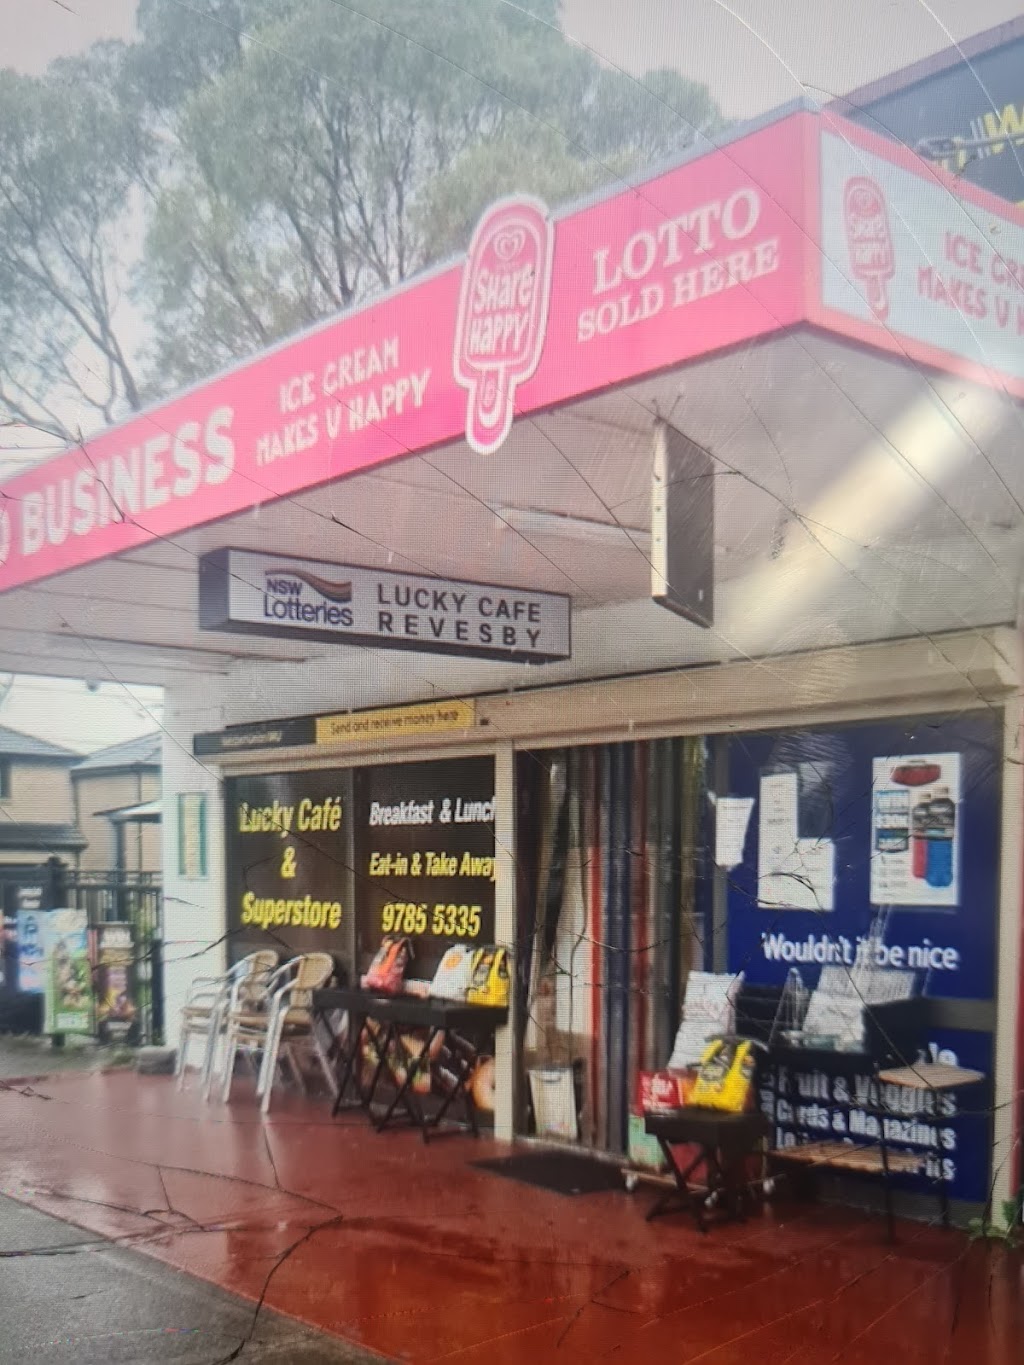 Lucky Cafe Revesby | convenience store | 273 The River Rd, Revesby NSW 2212, Australia | 0297855335 OR +61 2 9785 5335